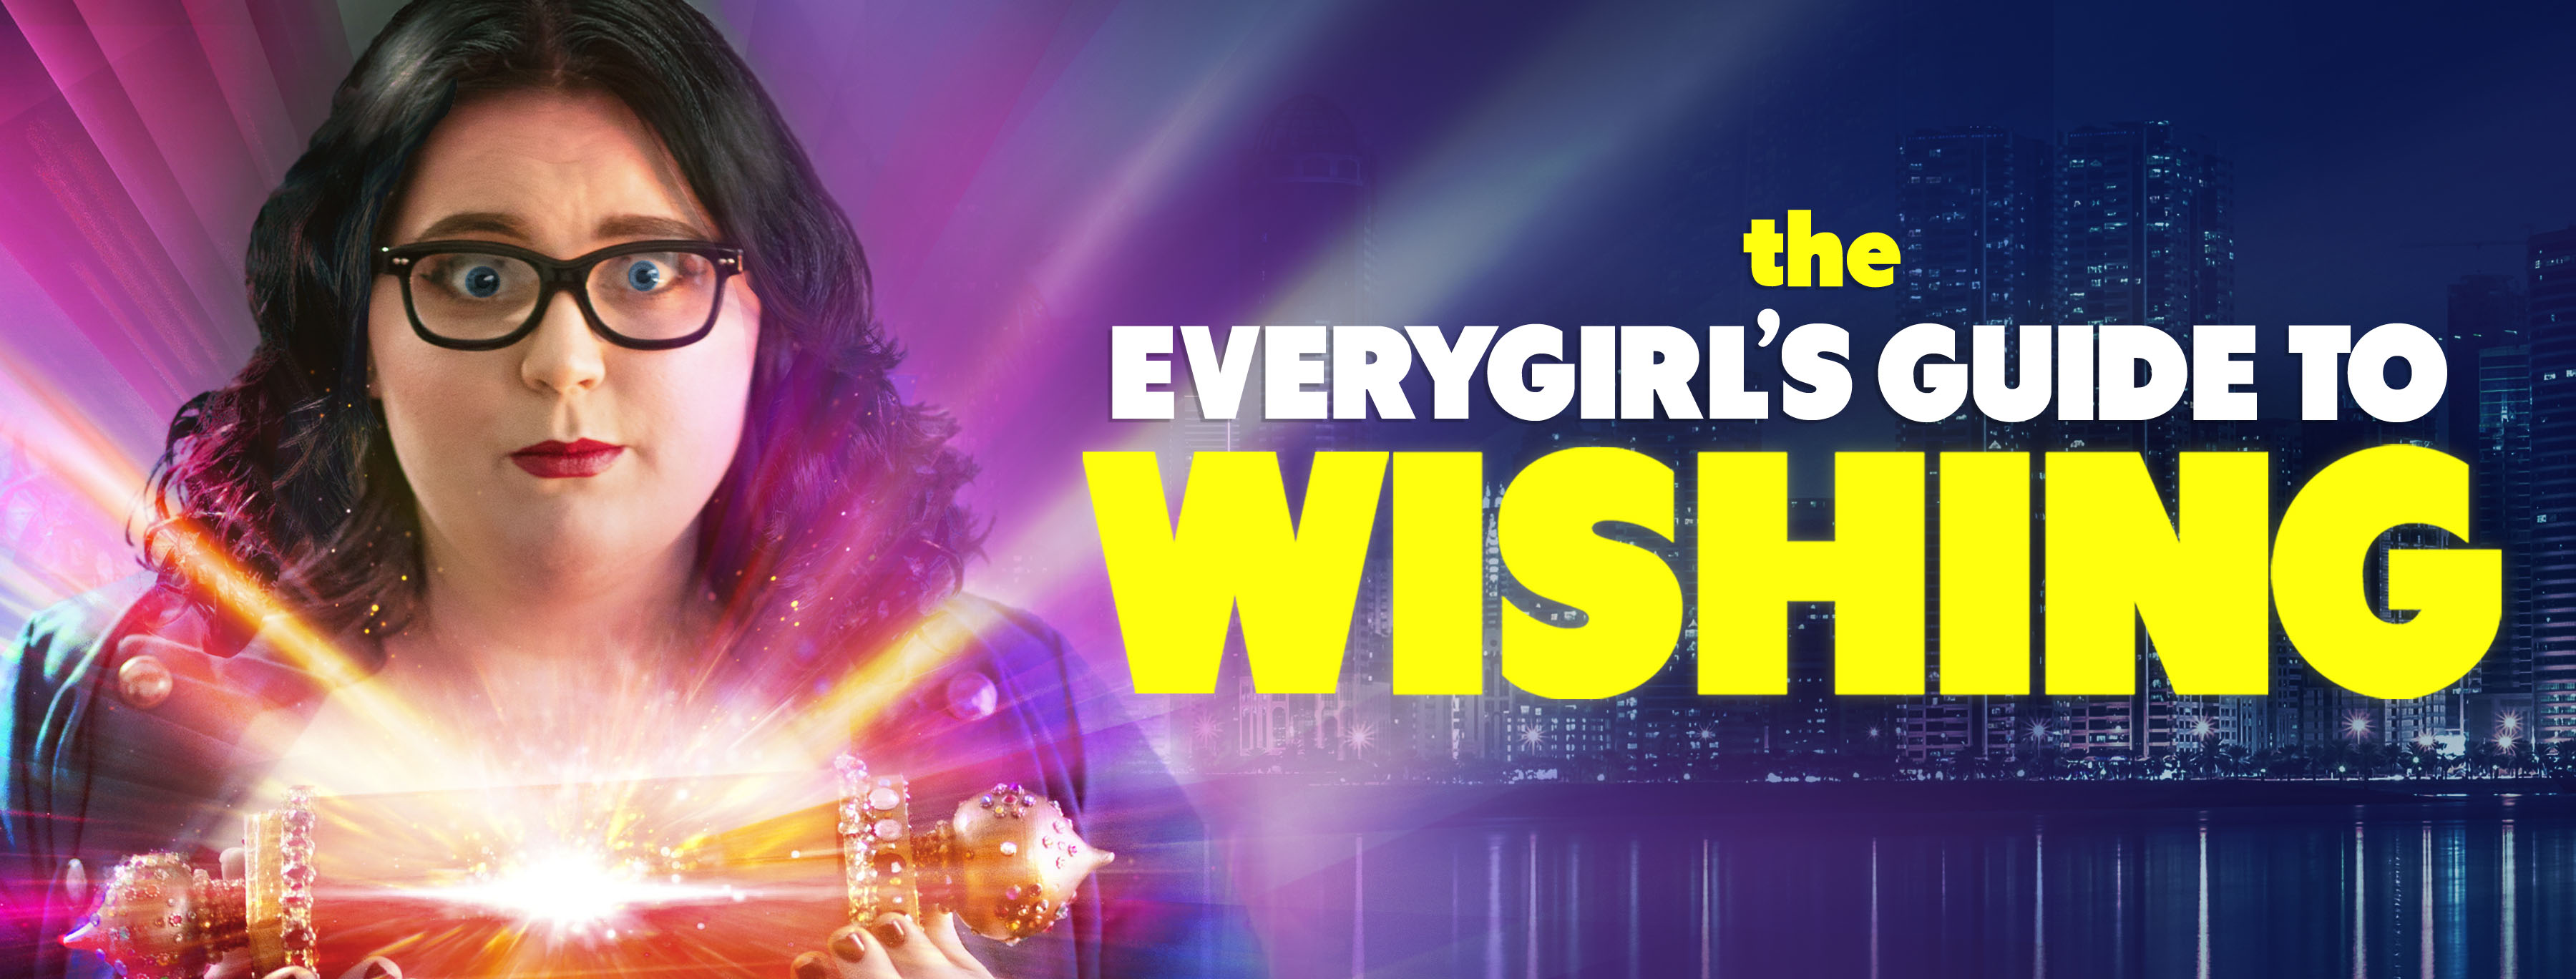 The Everygirl's Guide to Wishing